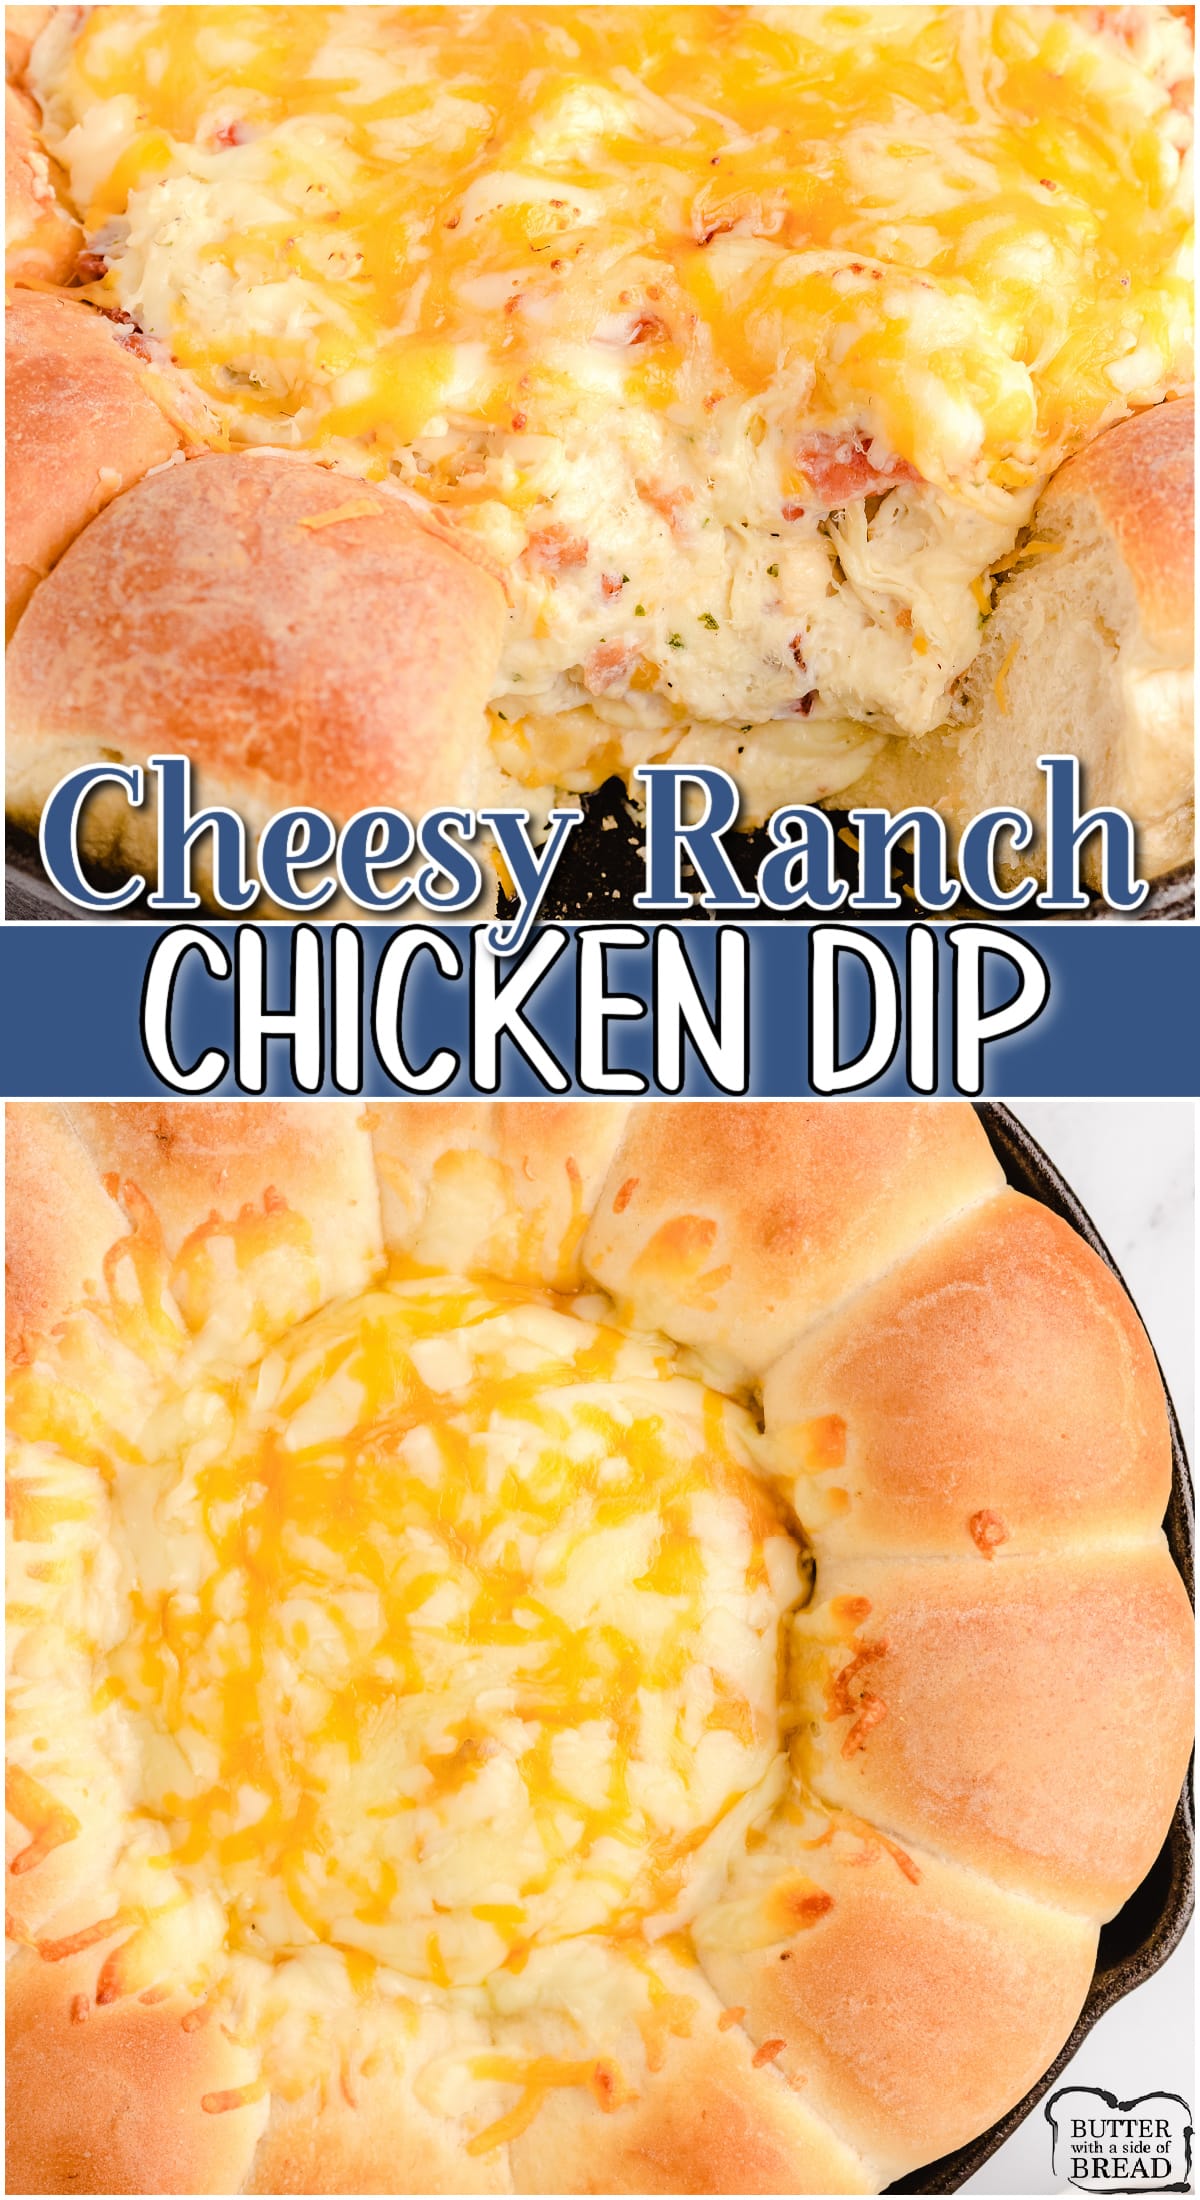 Cheesy Ranch Chicken Dip is a hot, bacon ranch dip baked in a ring of buttery soft rolls. Perfect cheesy dip for parties, holidays or any get together!